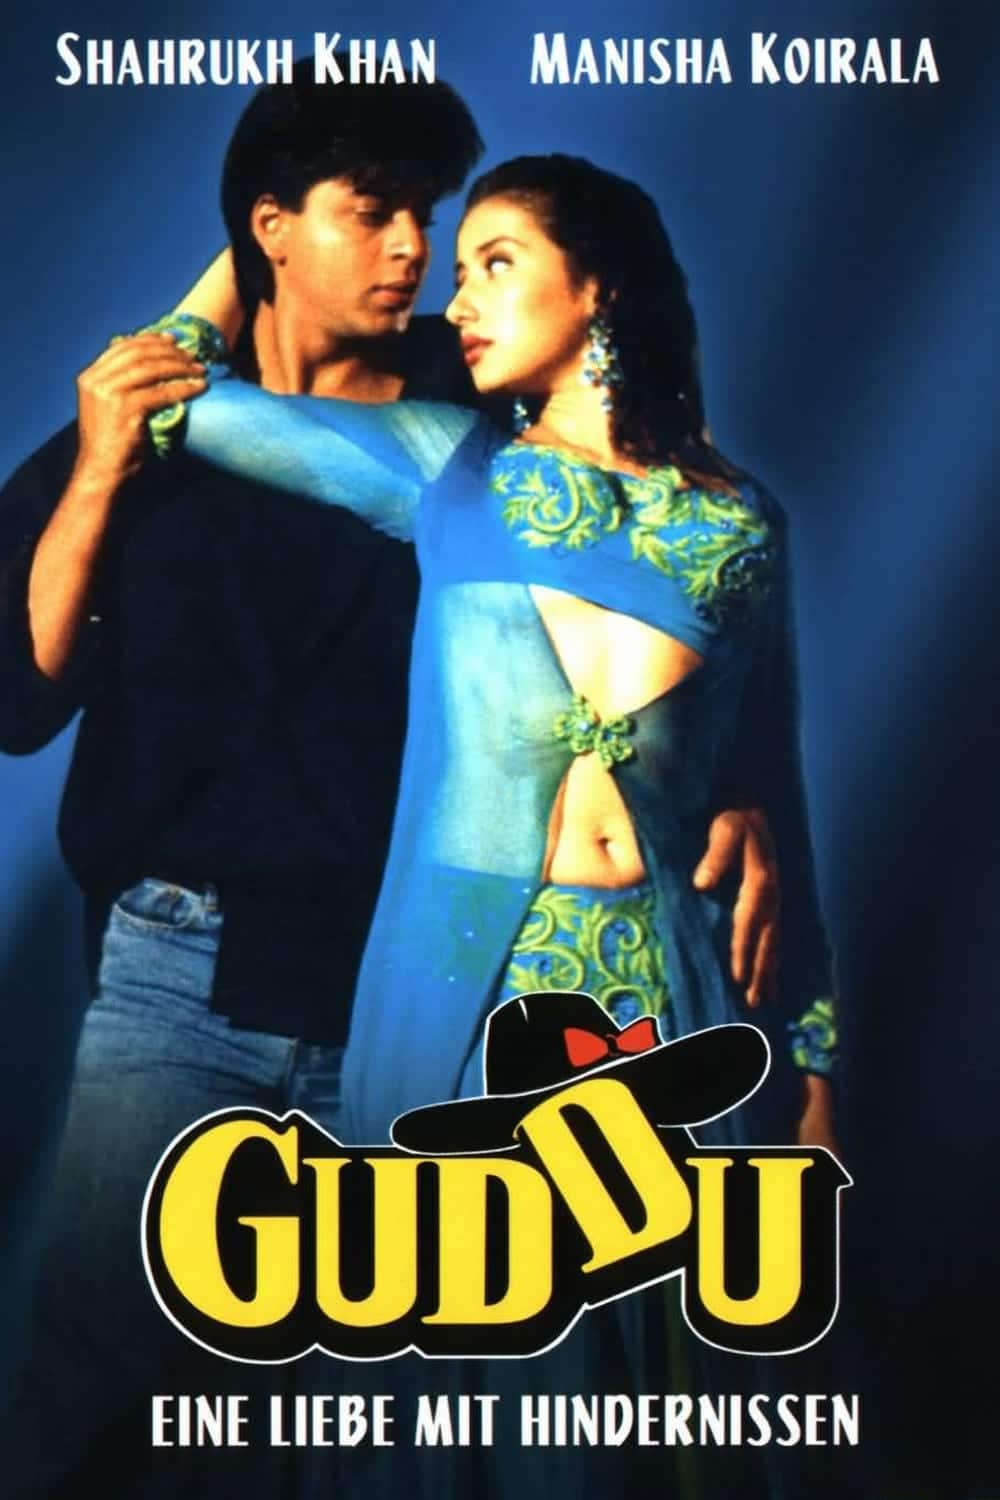 Poster for the movie "Guddu"